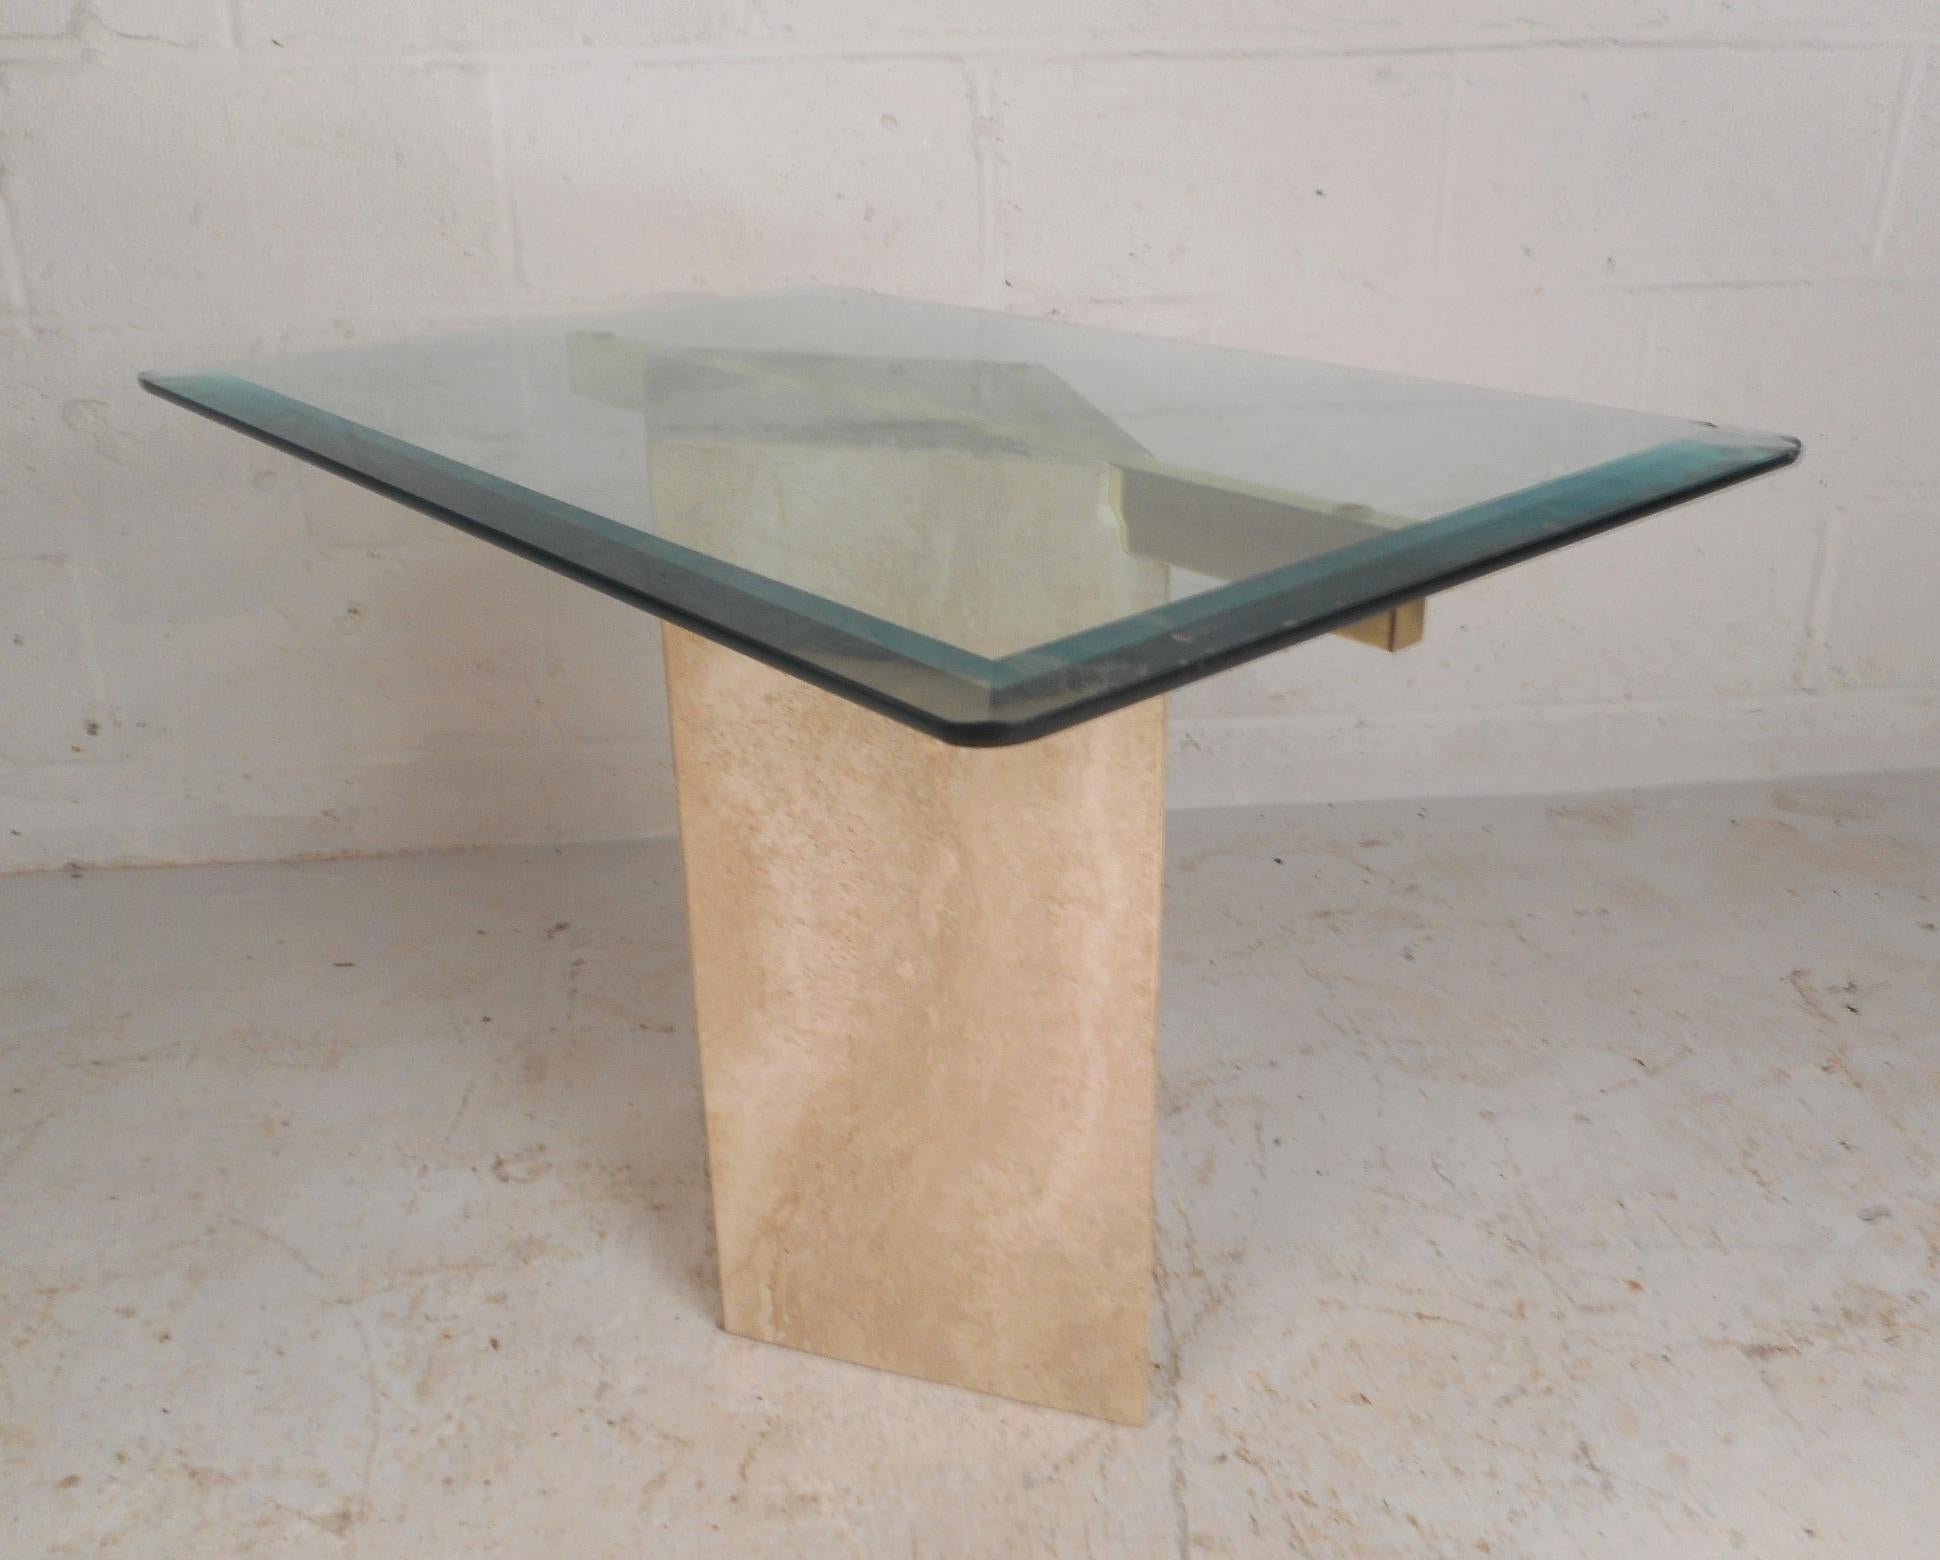 This stunning vintage modern end table and coffee table features a marble base with brass cross supports. An elegant Italian design with a cube base and a taller diamond shaped base. The large coffee table has two brass supports that allow the glass